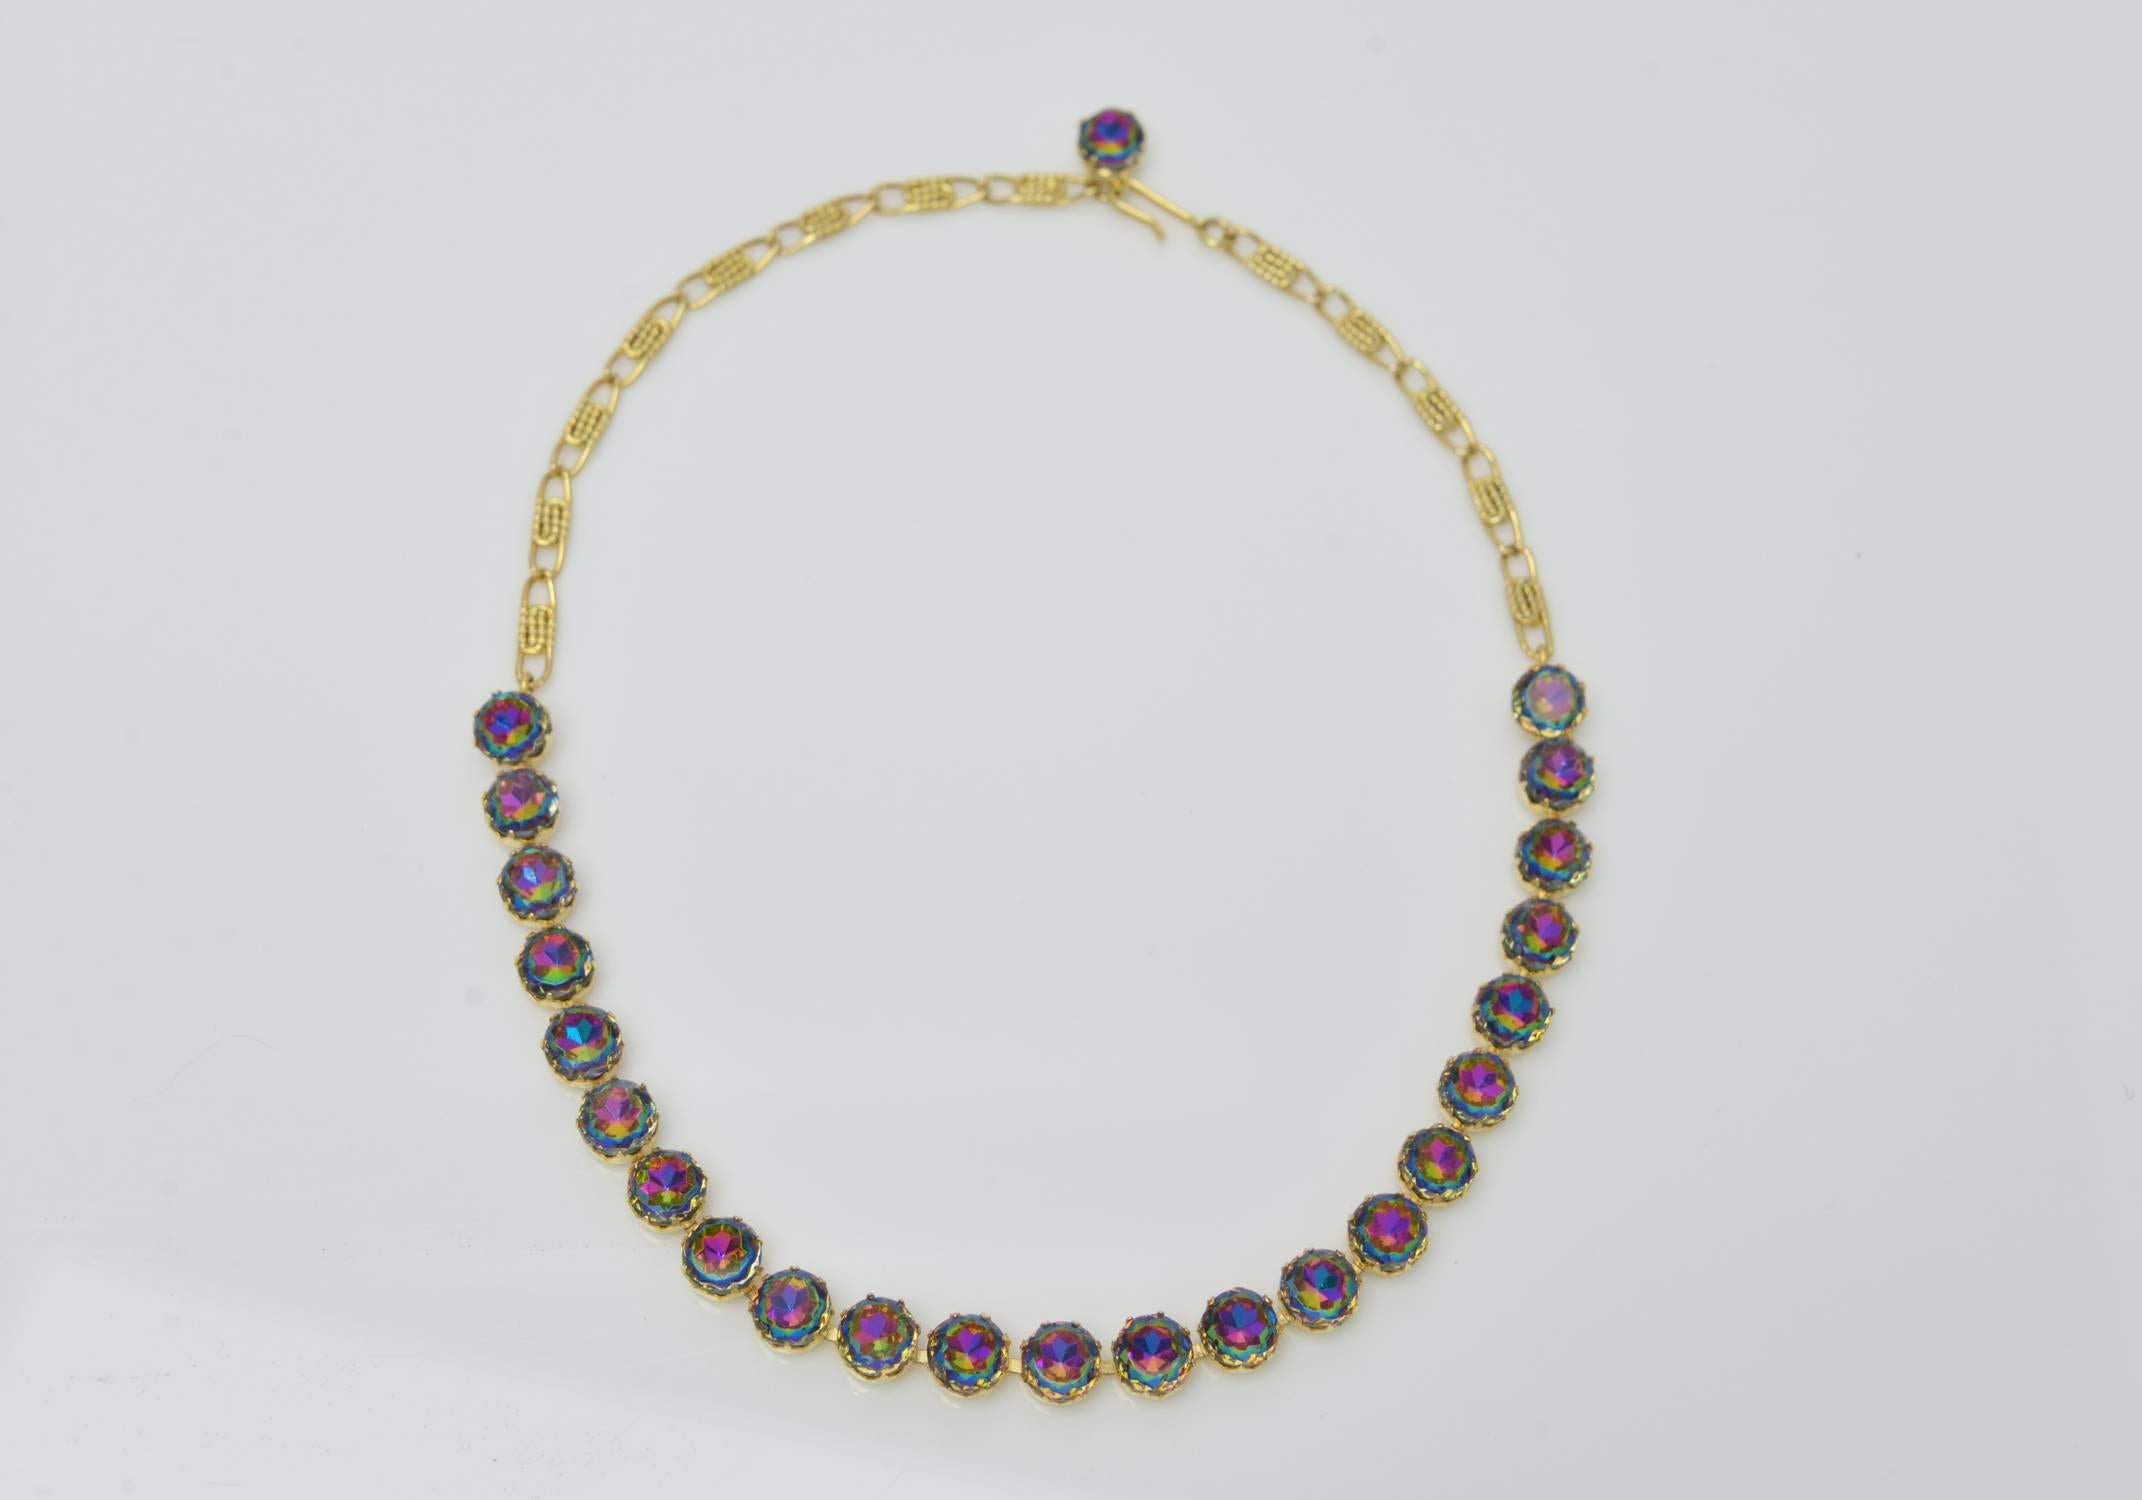 Unbelievable  and iconic Schiaparelli Watermelon Tourmaline colored Parure surviving from the mid 1950's consisting of 1 stamped necklace, 1 stamped bracelet & 1 stamped pair of clip earrings.Gold plated and prong set throughout.
A phenomenal